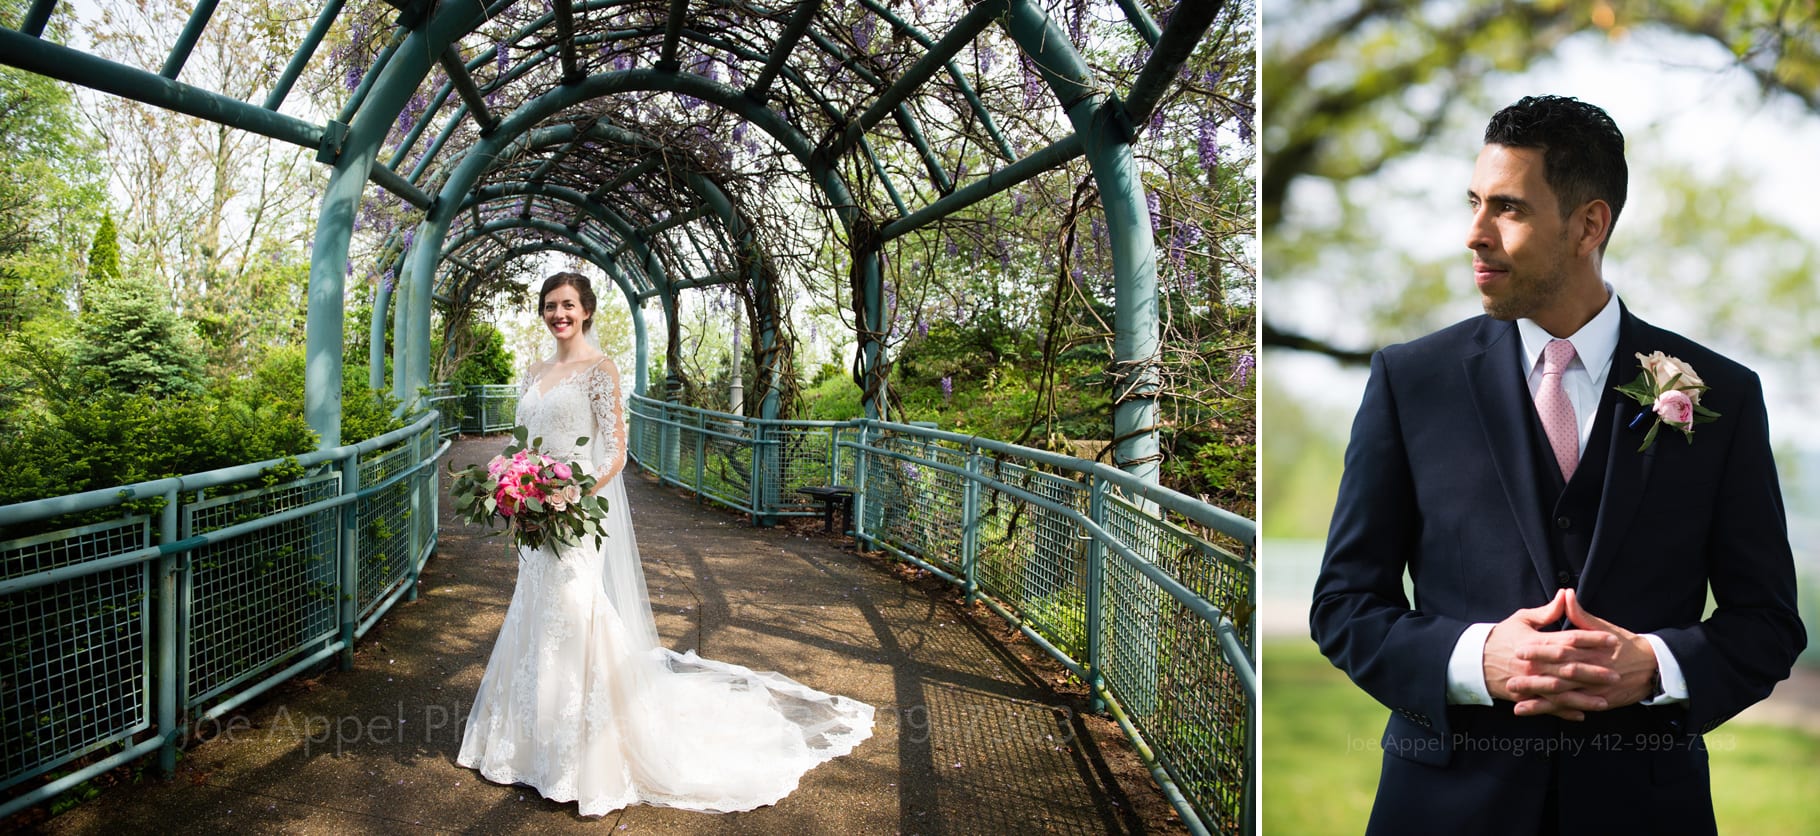 Two photos the first one being a full-length portrait of a bride standing beneath an ivy covered arbor and the second of a groom looking left as he clasps his hands in front of himself.